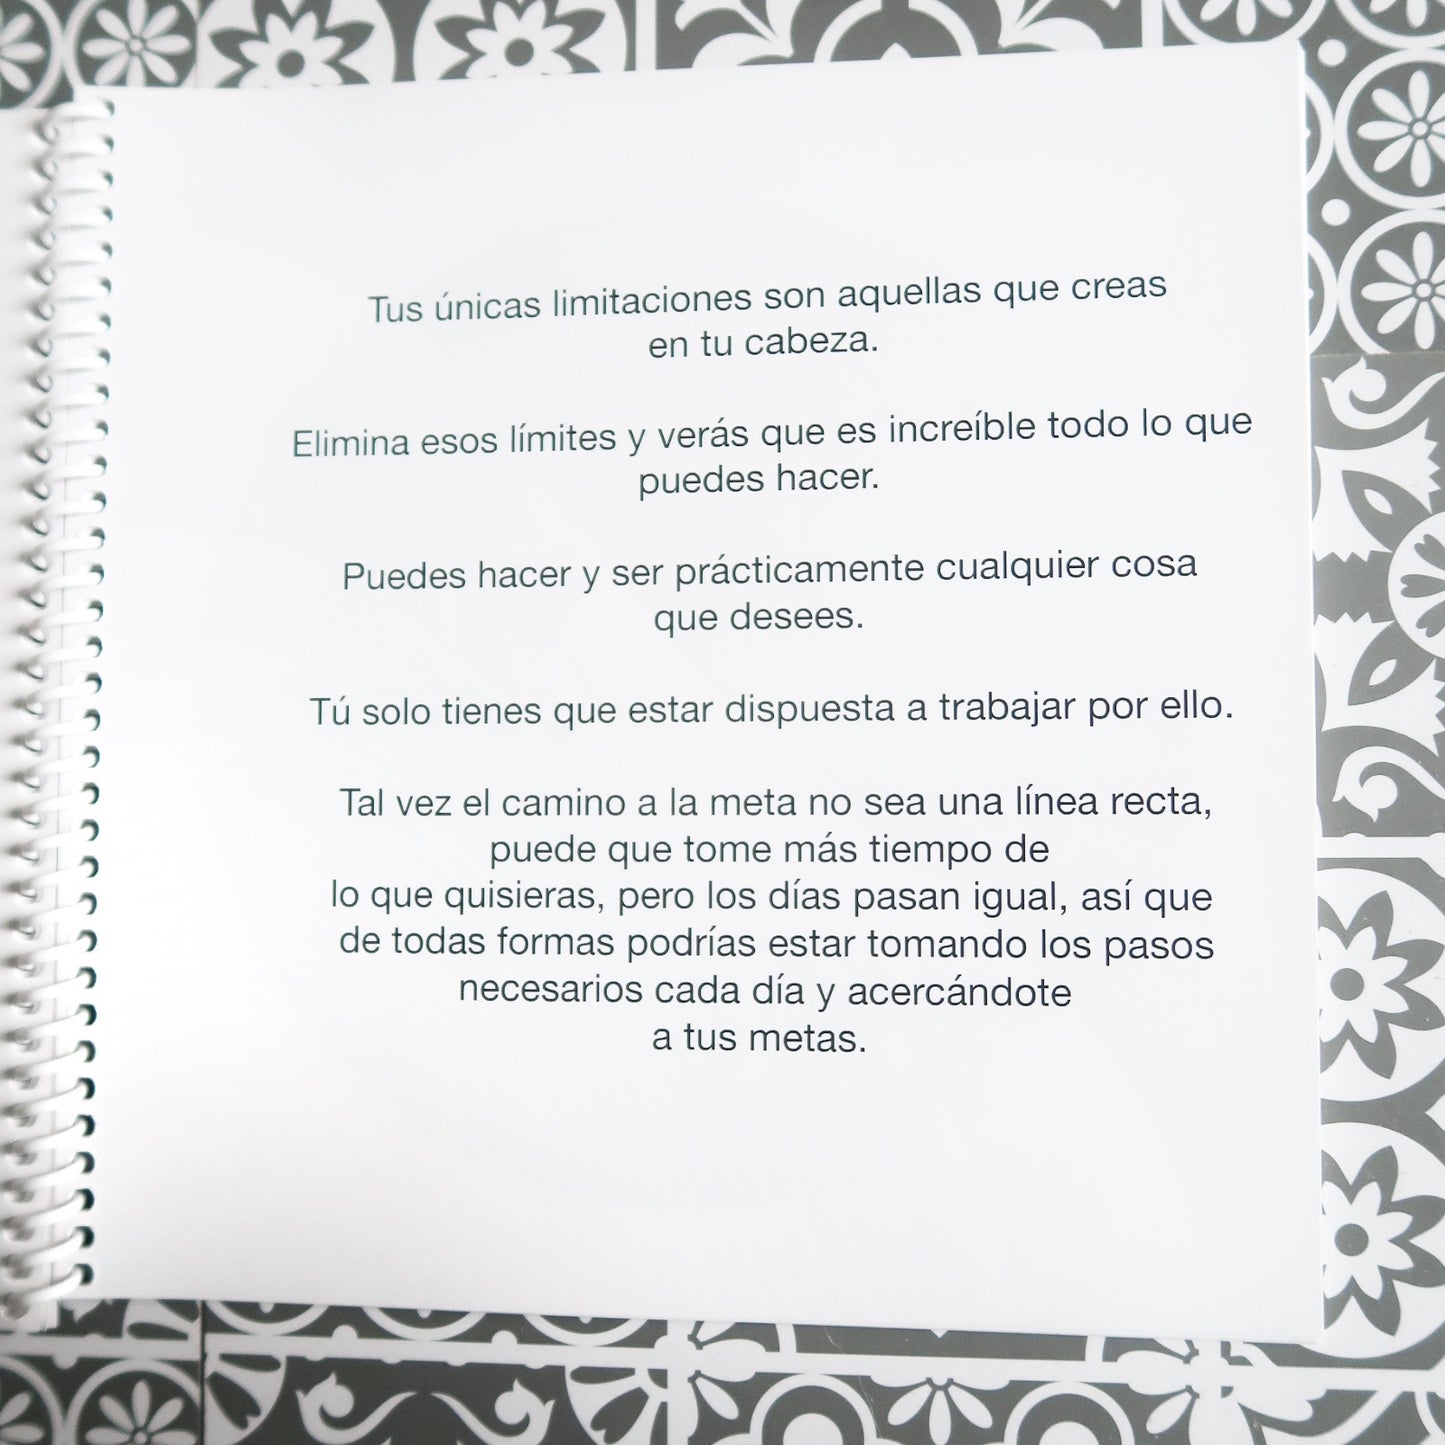 the keep it bright book - Spanish edition